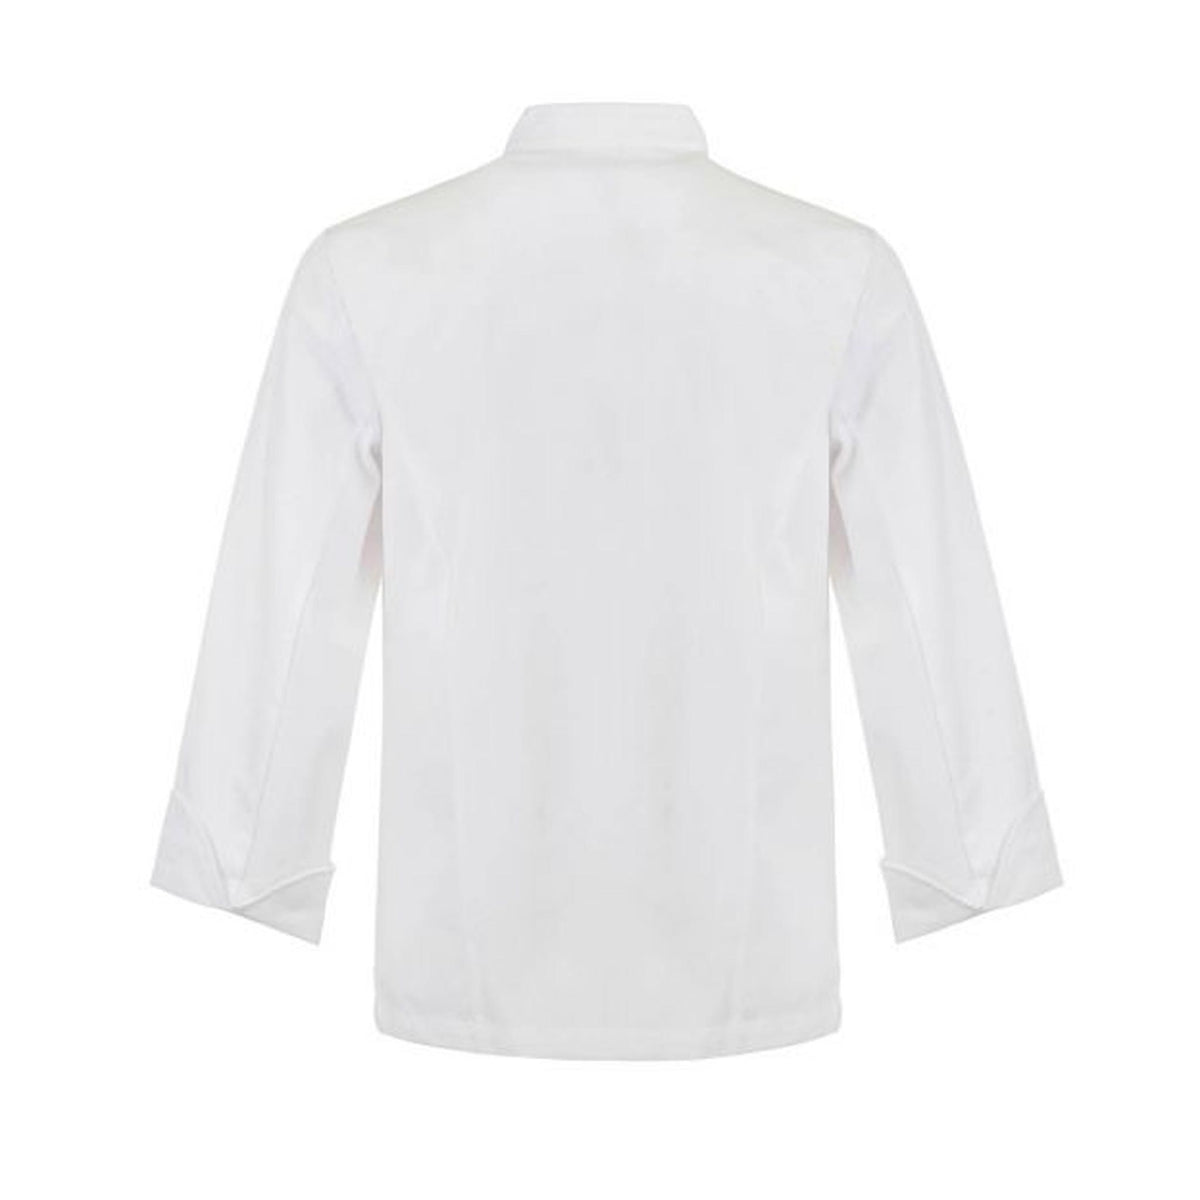 white long sleeve executive chefs jacket with press studs back view